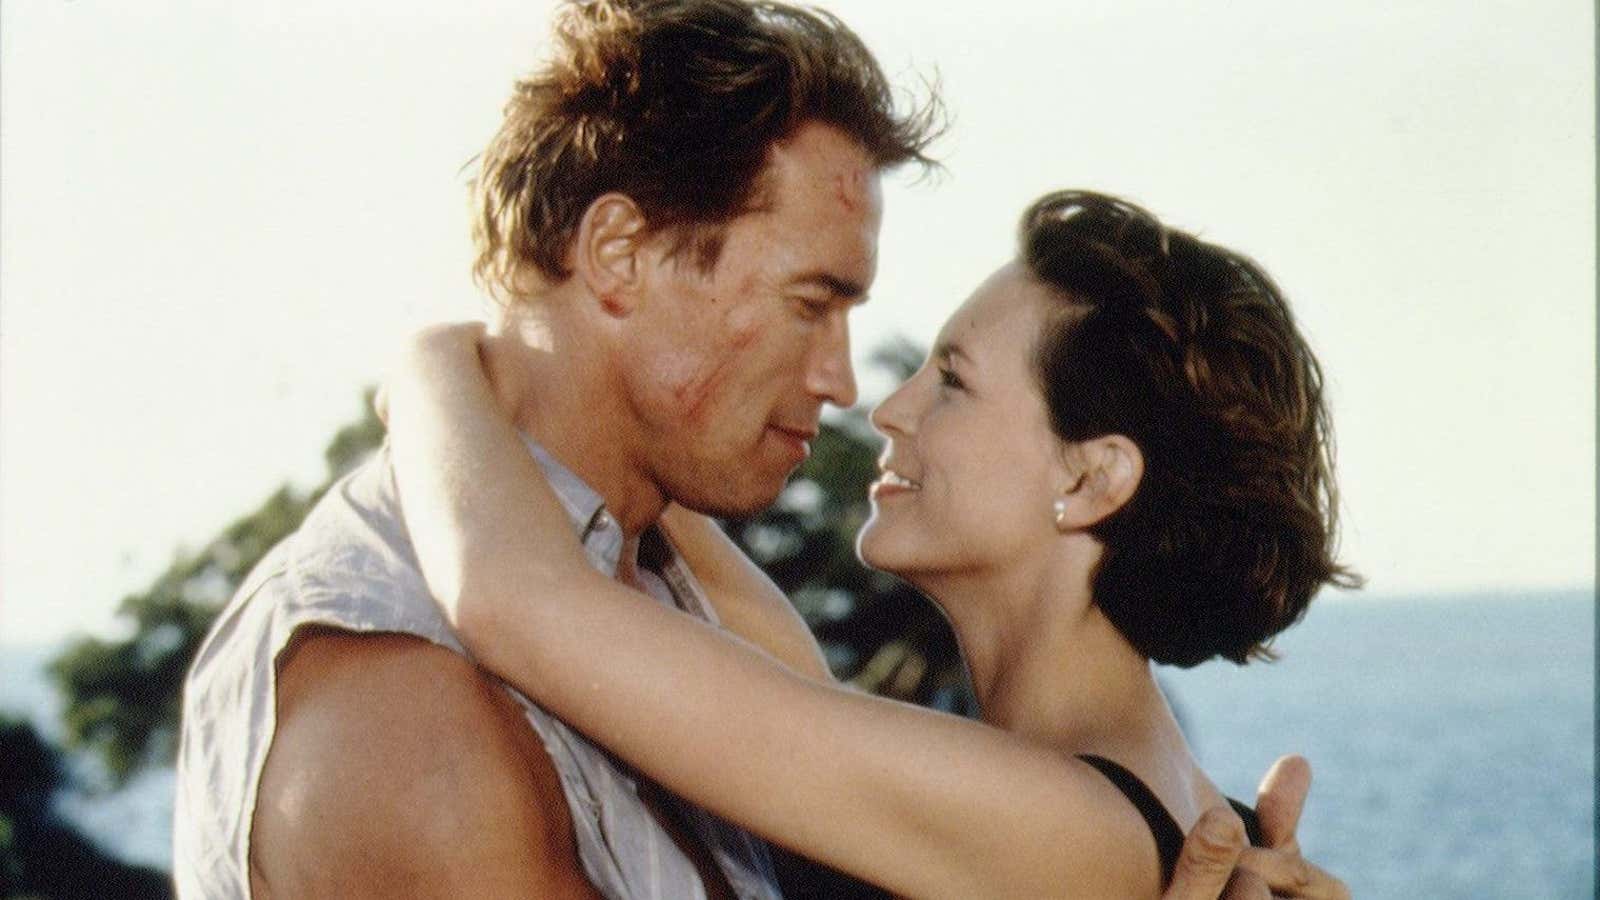 James Cameron’s “True Lies” is one of the missing movies.